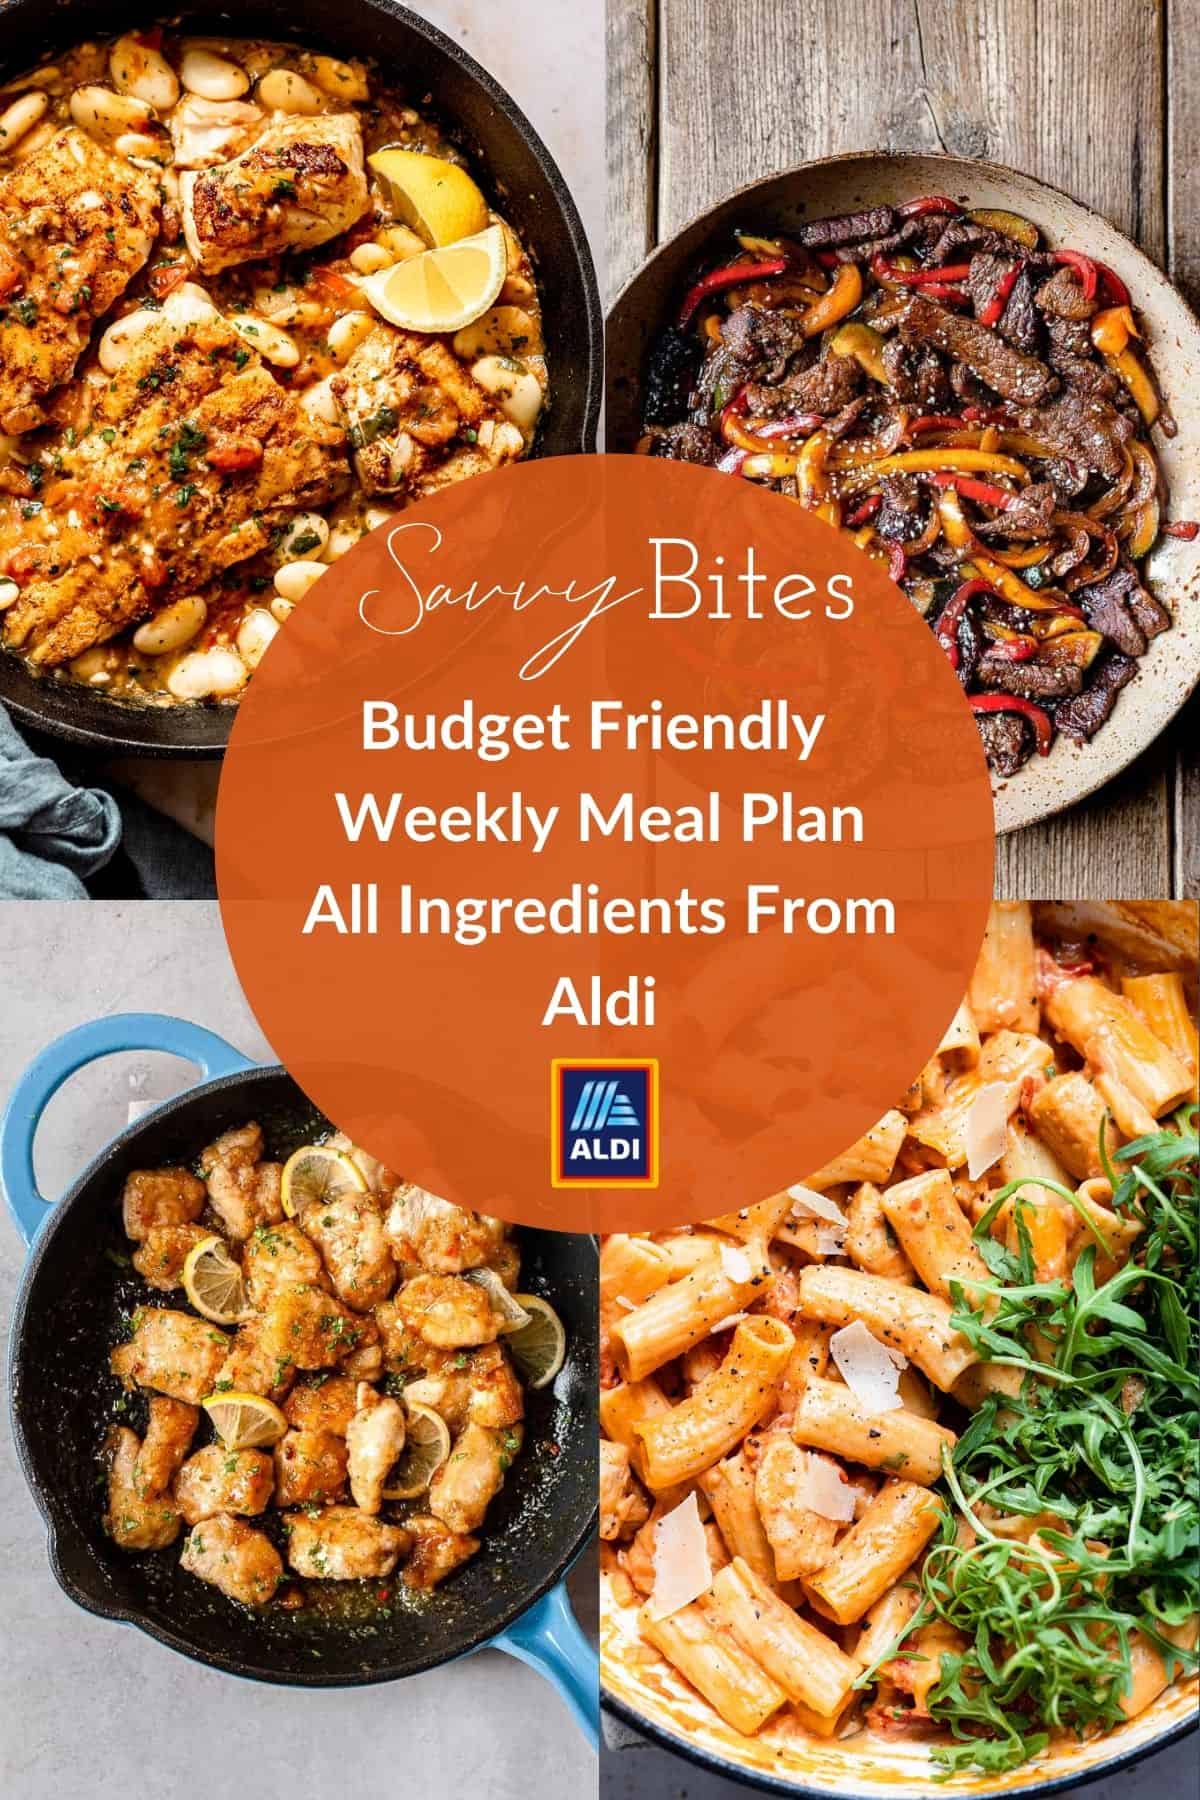 Aldi Meal Plan Collage with recipe photos.